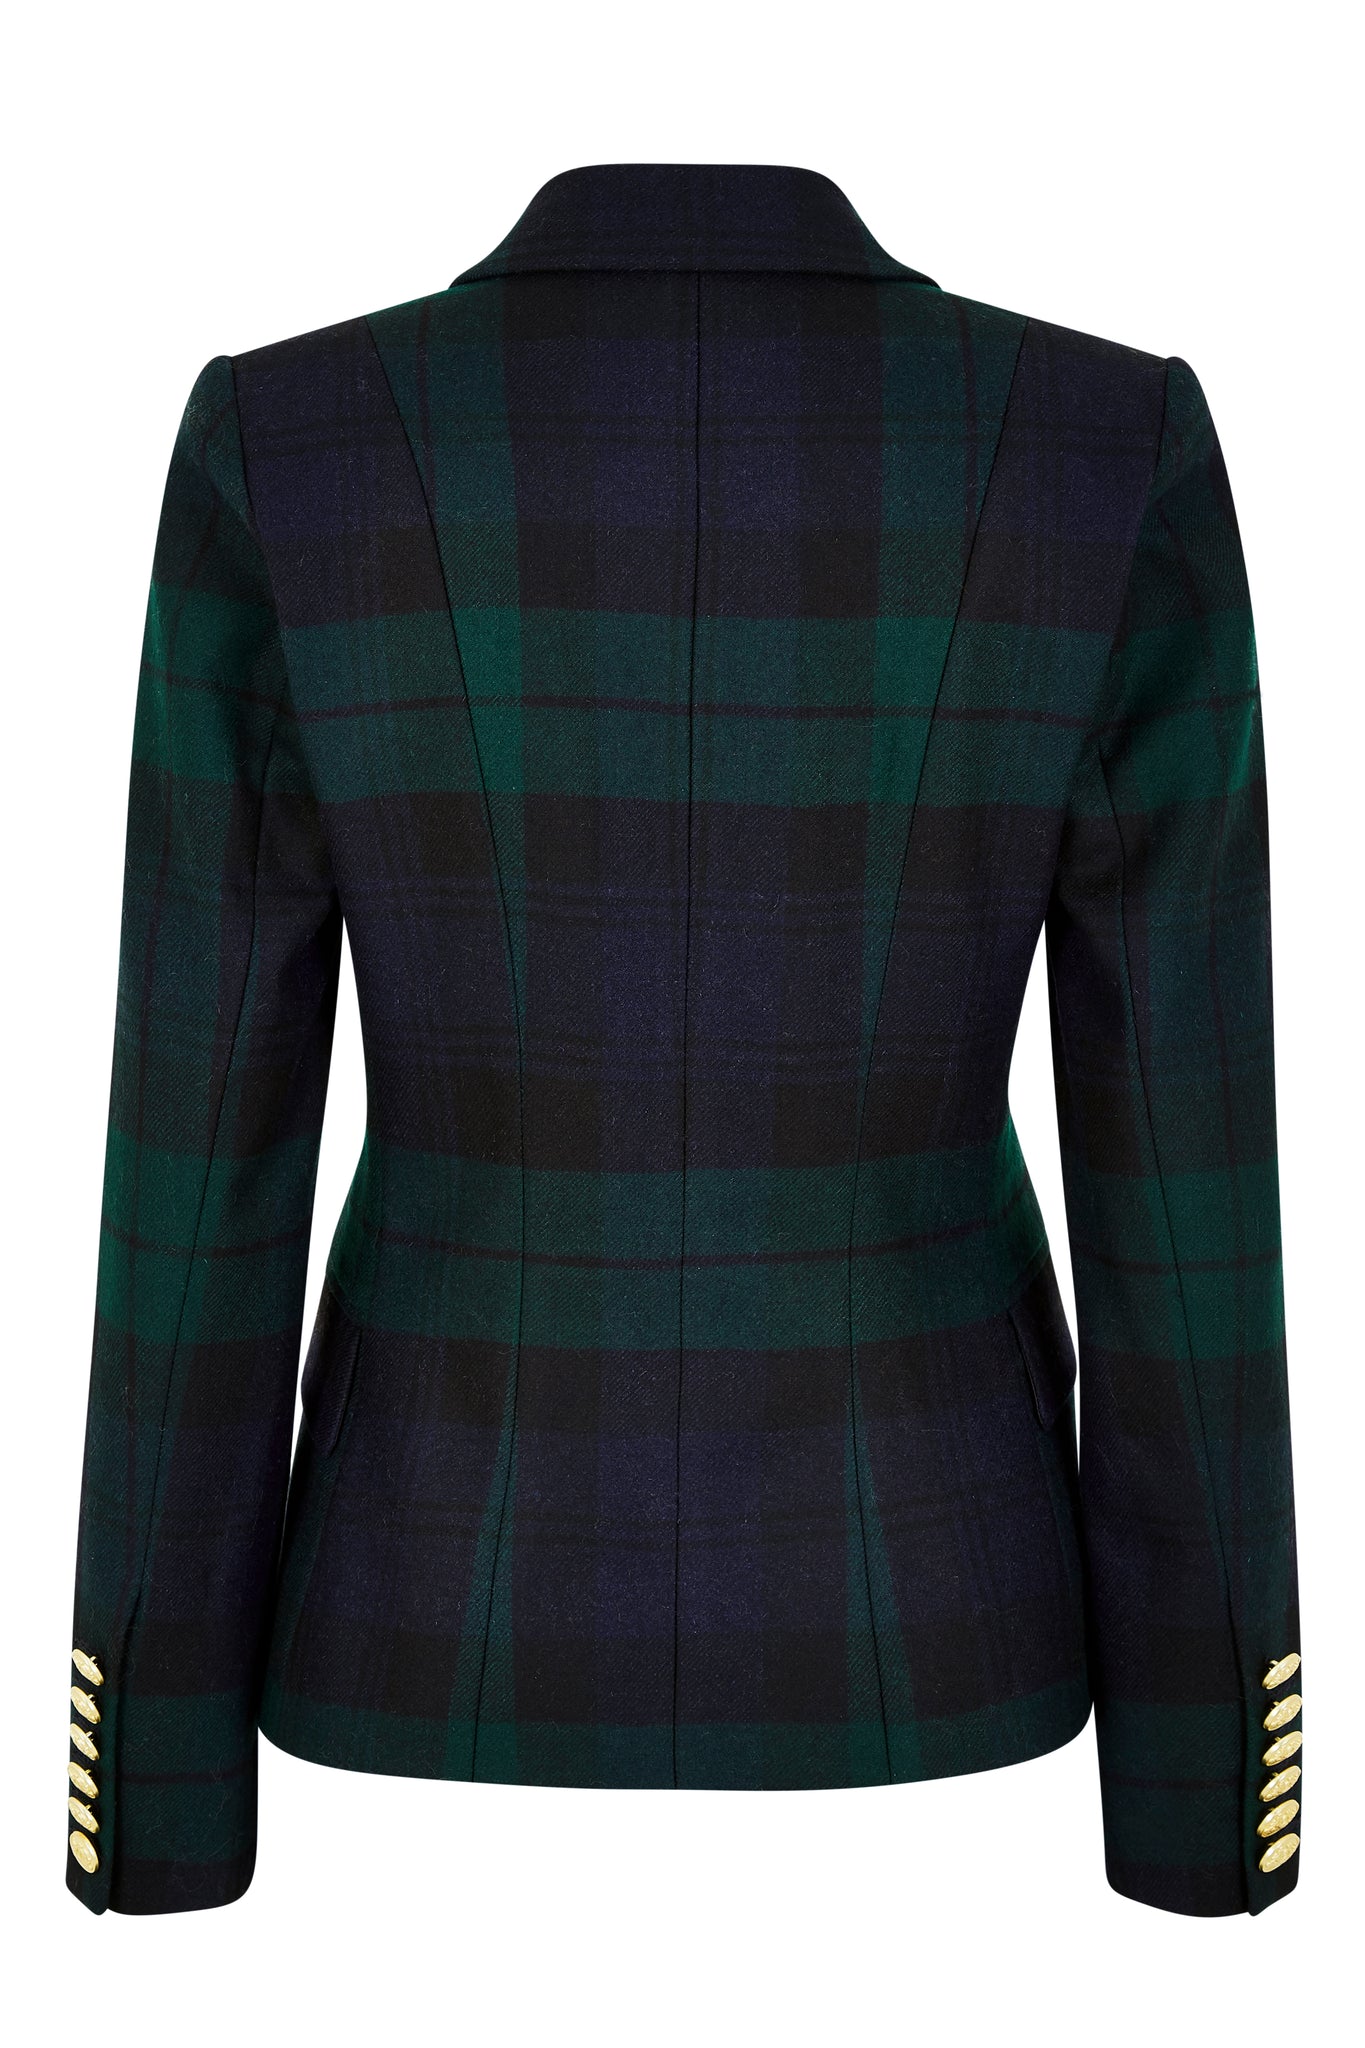 back of British made double breasted blazer that fastens with a single button hole to create a more form fitting silhouette with two pockets and gold button detailing this blazer is made from navy and green blackwatch tartan